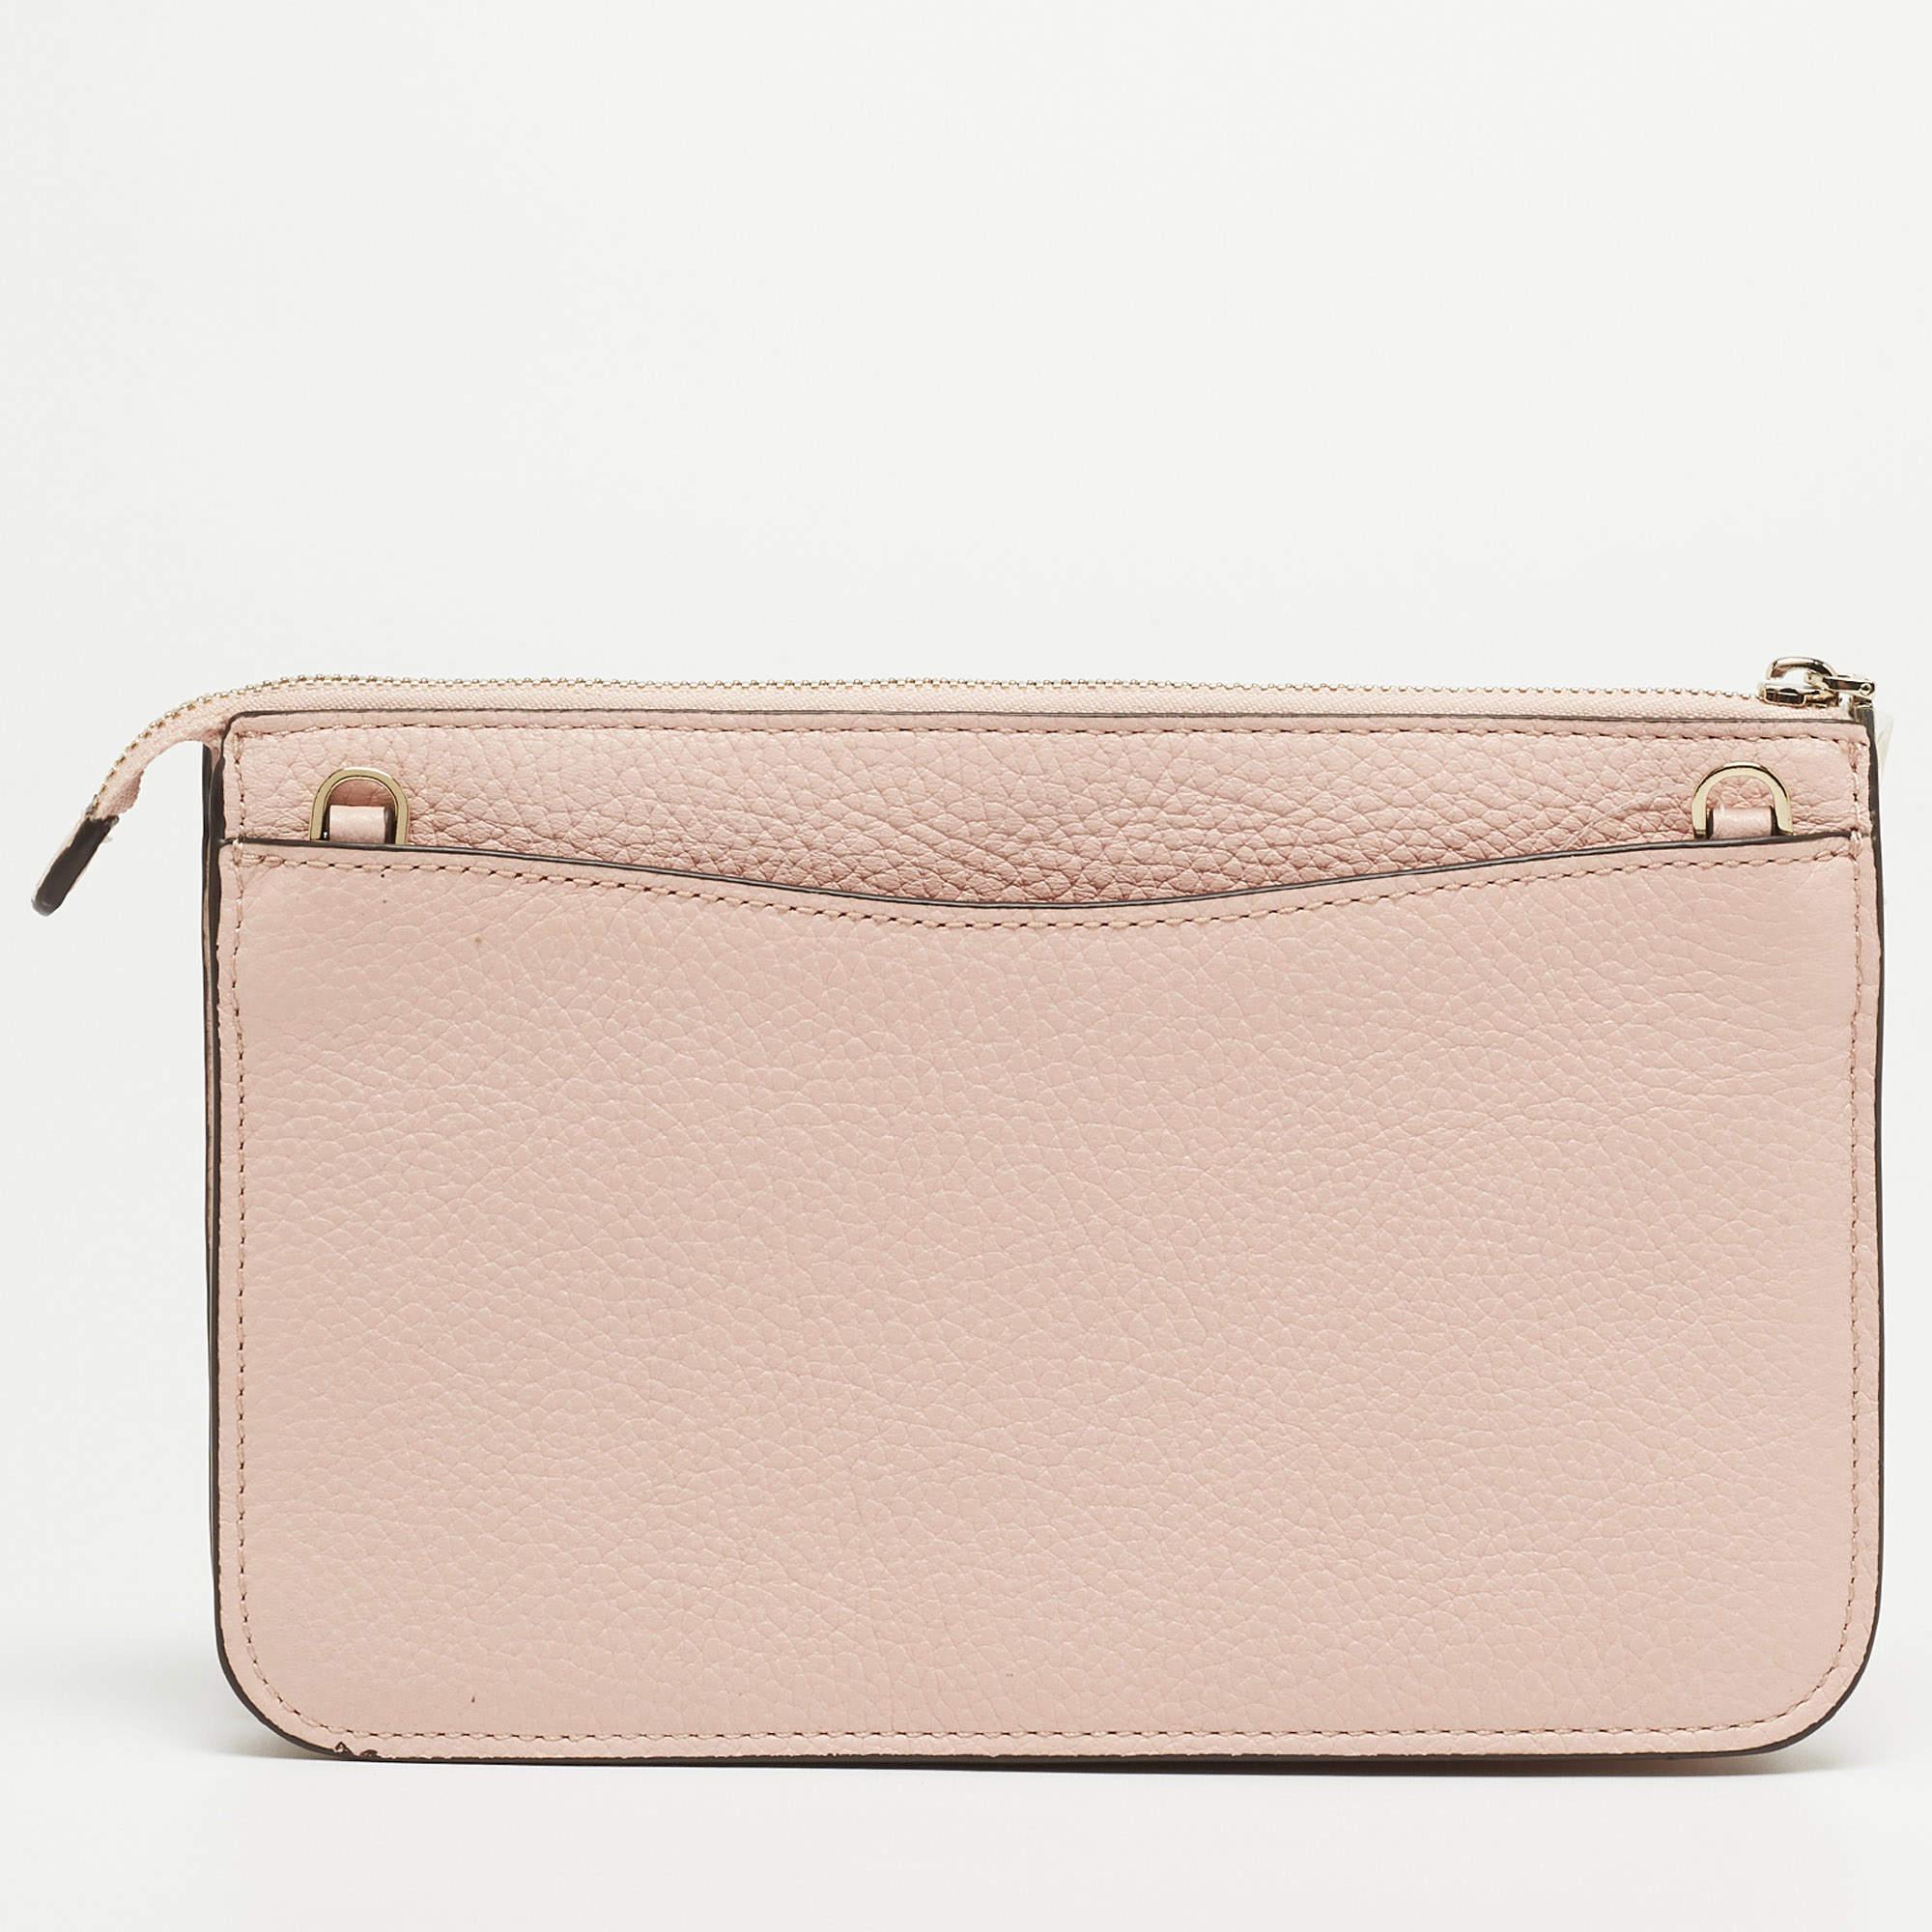 Designed to last, this beautiful crossbody bag is a smart buy. Comfortable and easy to carry, this handy creation comes with an interior lined to keep your essentials organized and safe.

Includes: Price Tag, Detachable Strap

